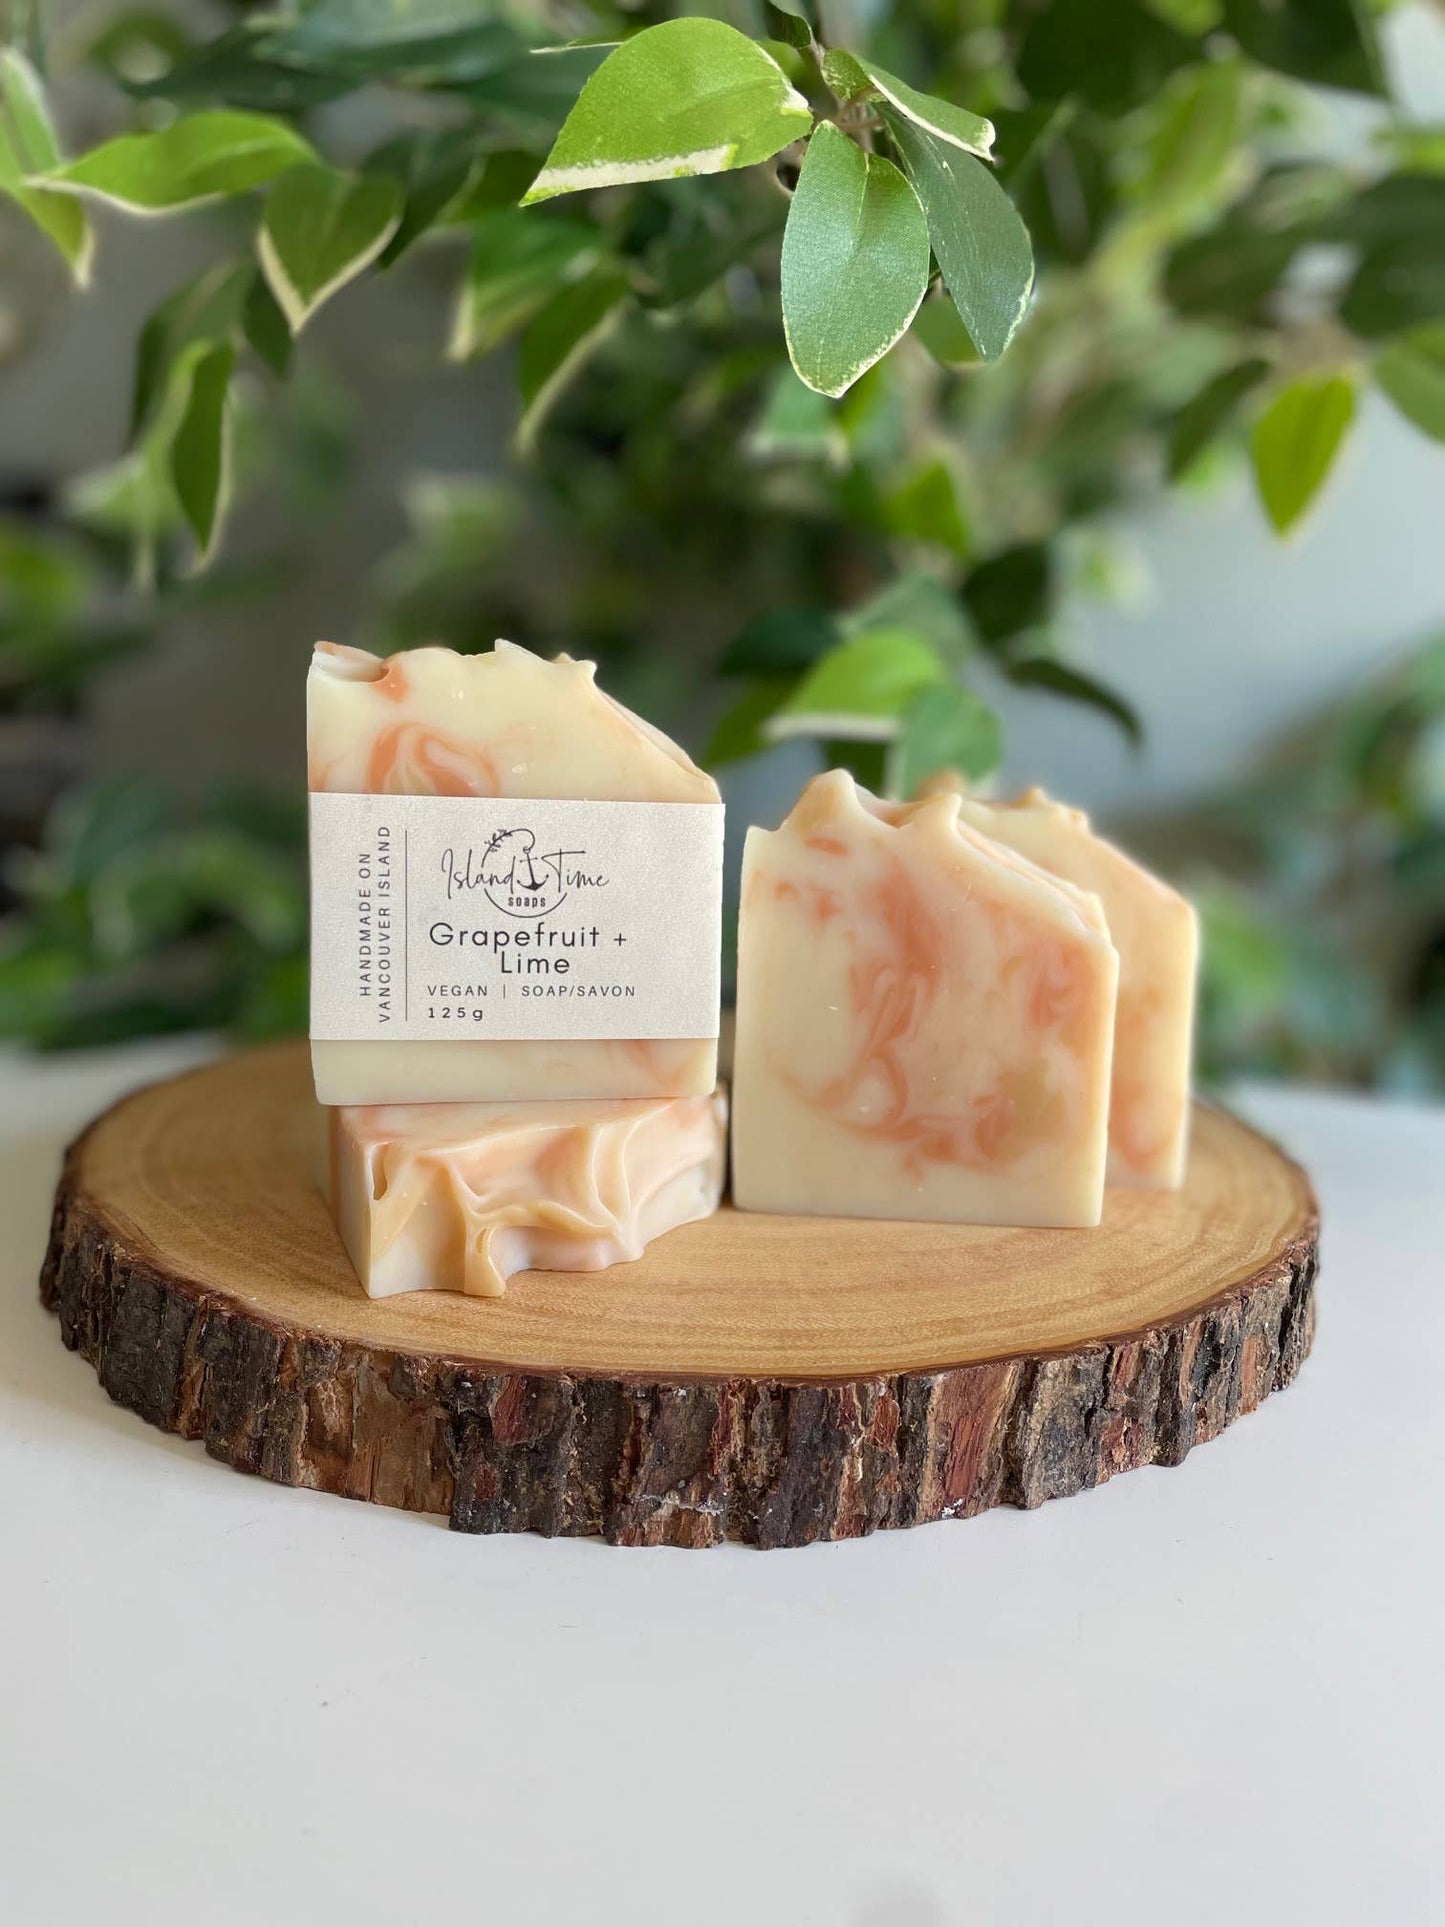 Island Time Soap + Candle - All Natural Grapefruit + Lime Handmade Artisan Soap